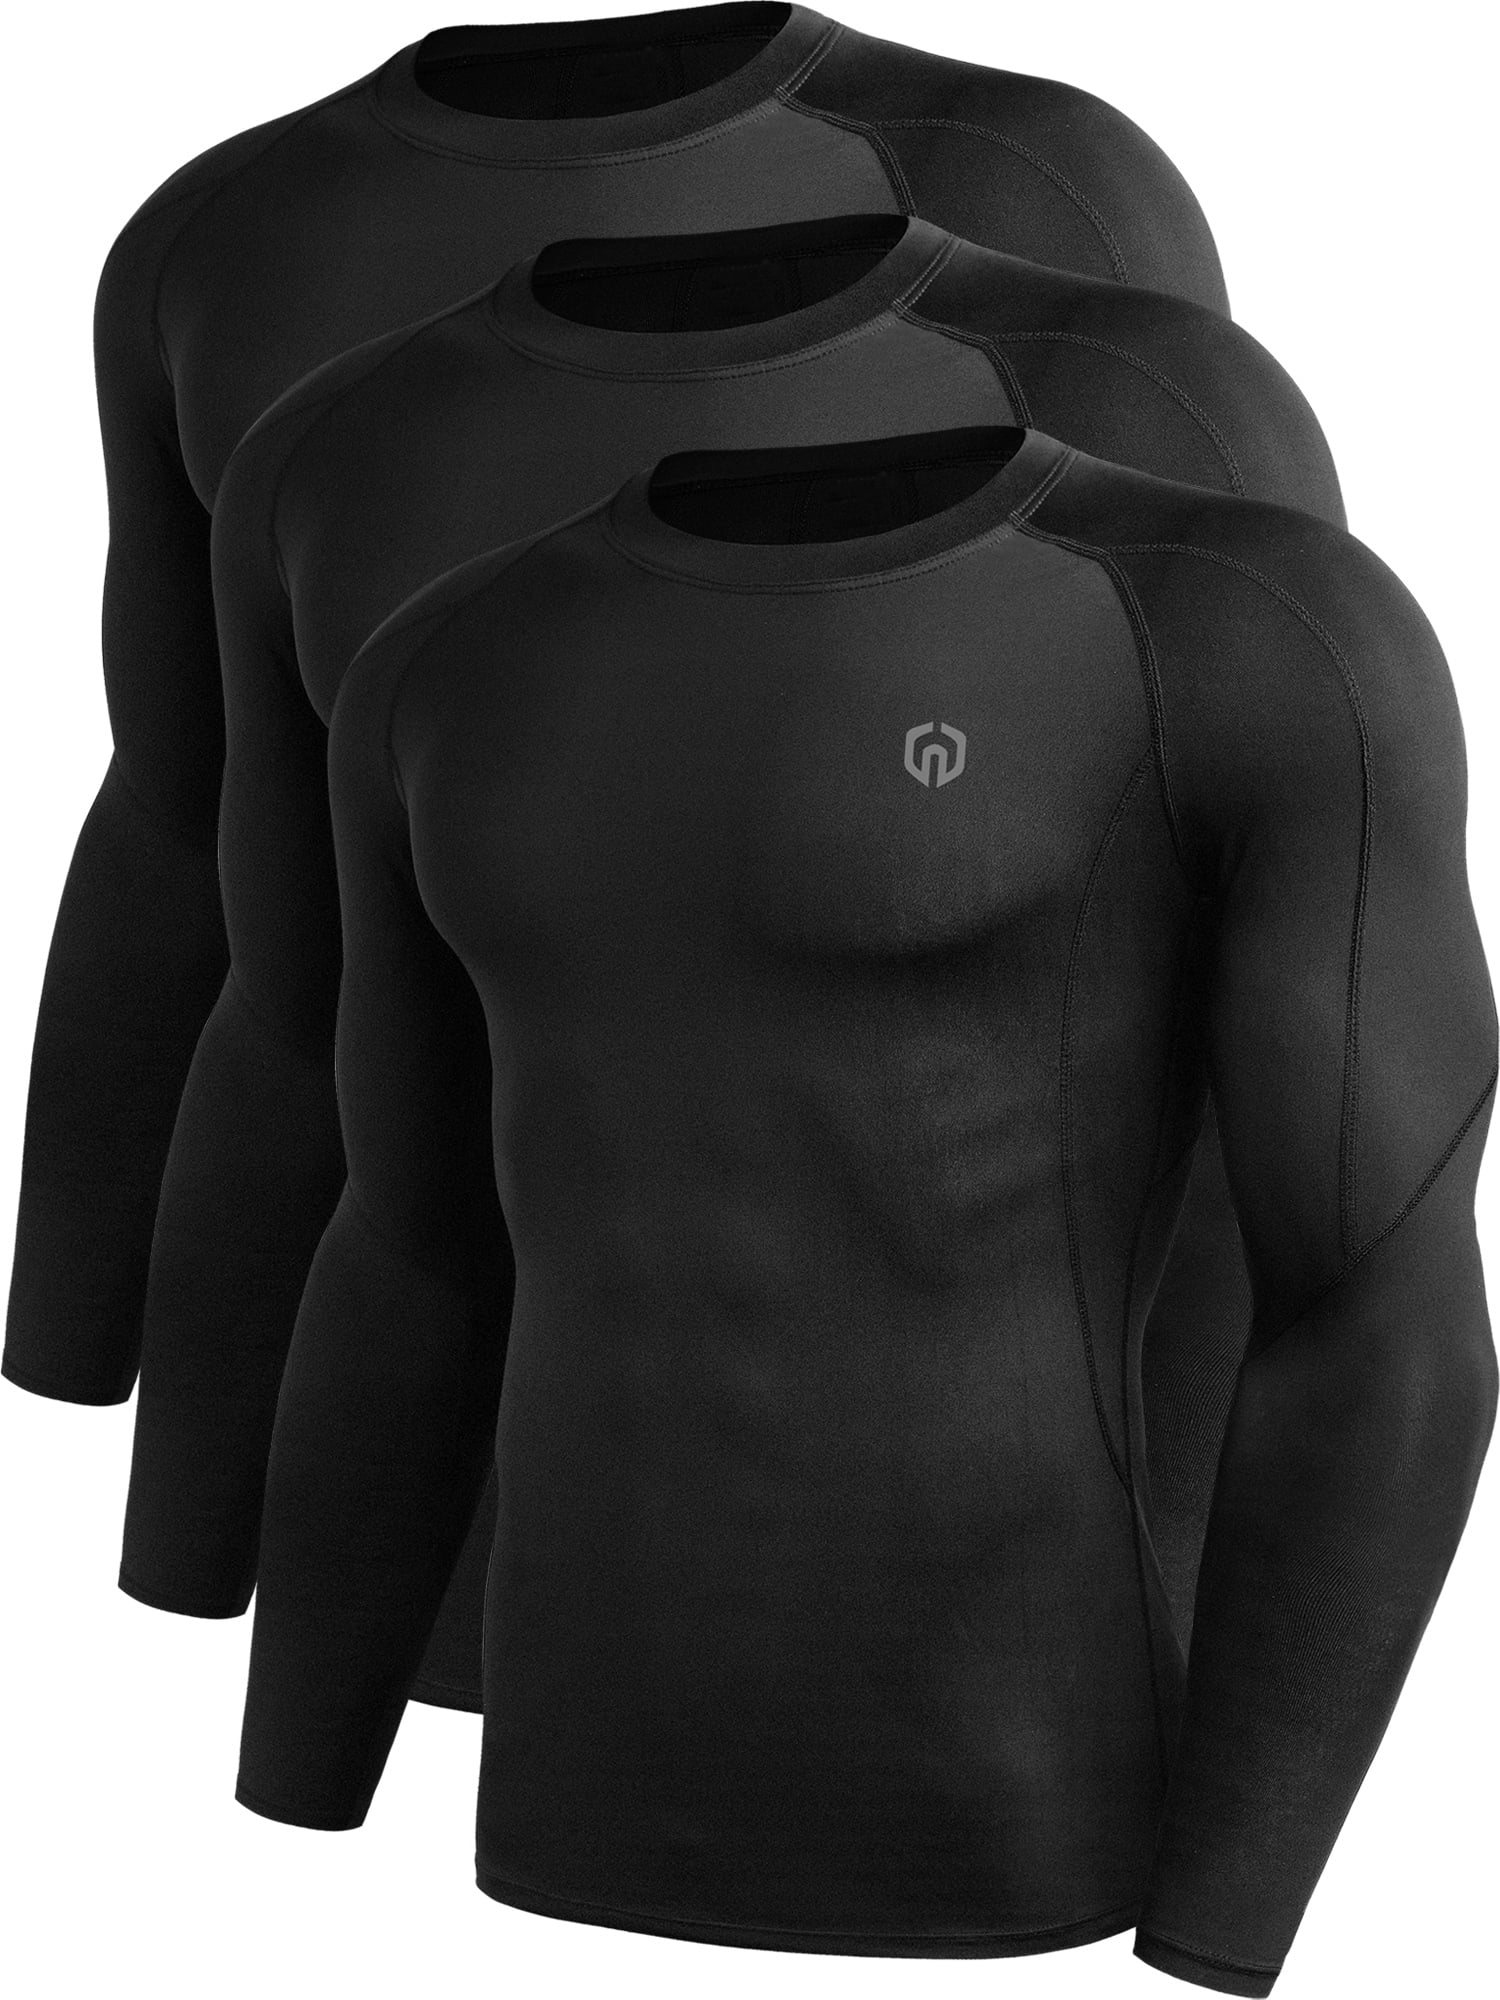 Men's Cool Dry Skin Fit Long Sleeve Compression Shirt Tight T-shirt Tops XL  